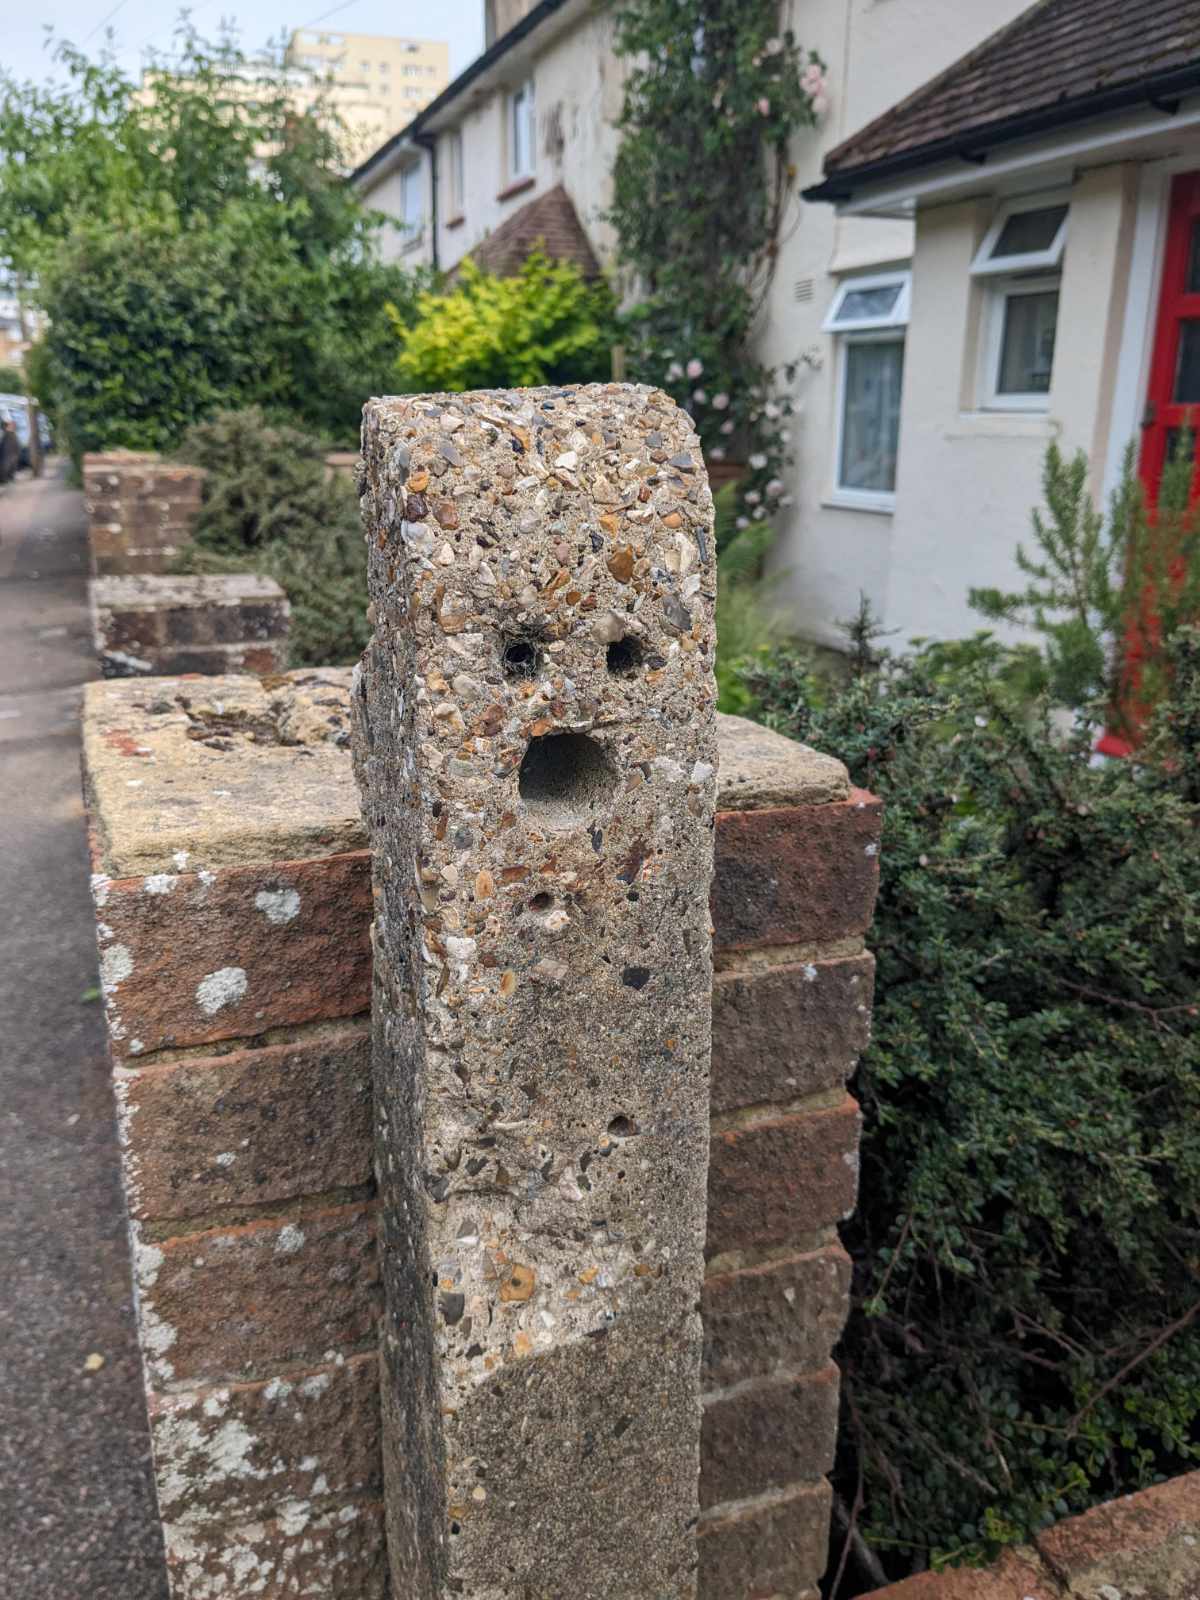 This post has seen some things